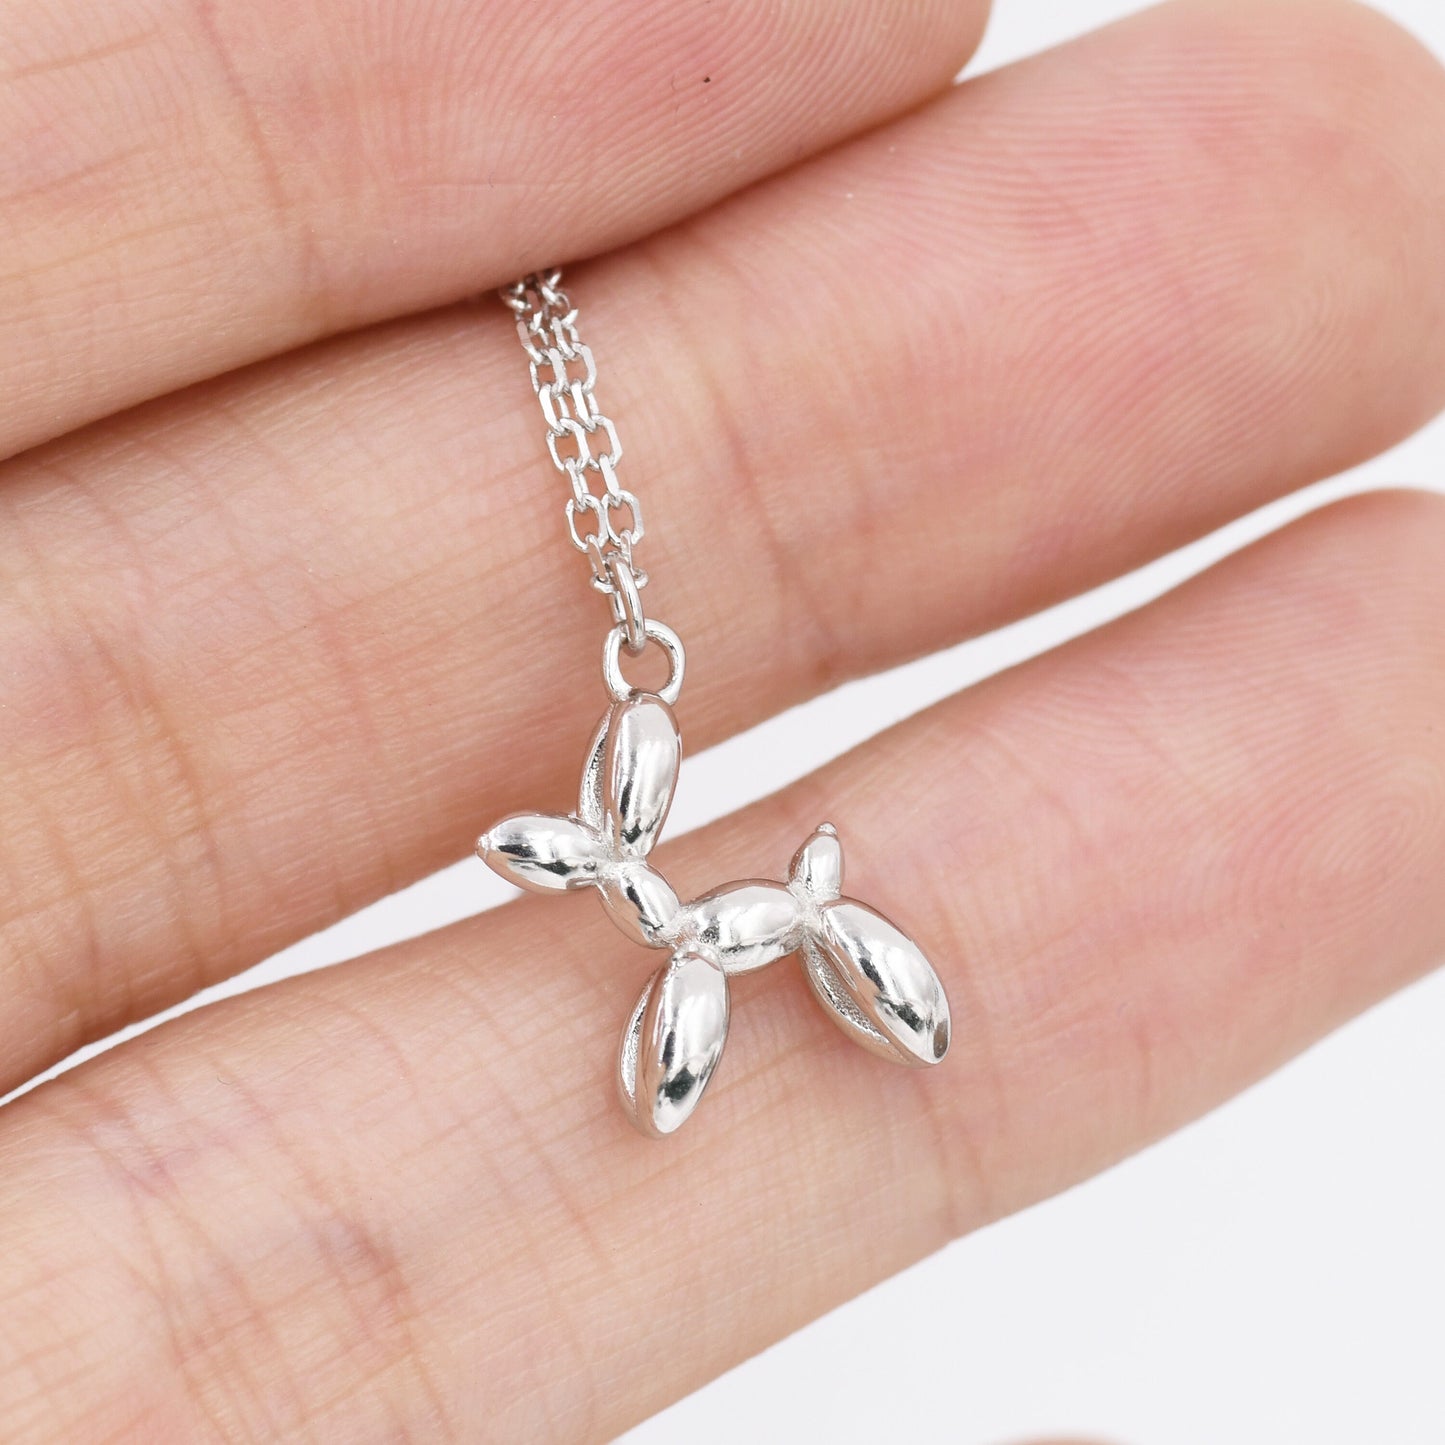 Tiny Balloon Dog Pendant Necklace in Sterling Silver, Silver or Gold, Cute and Quirky